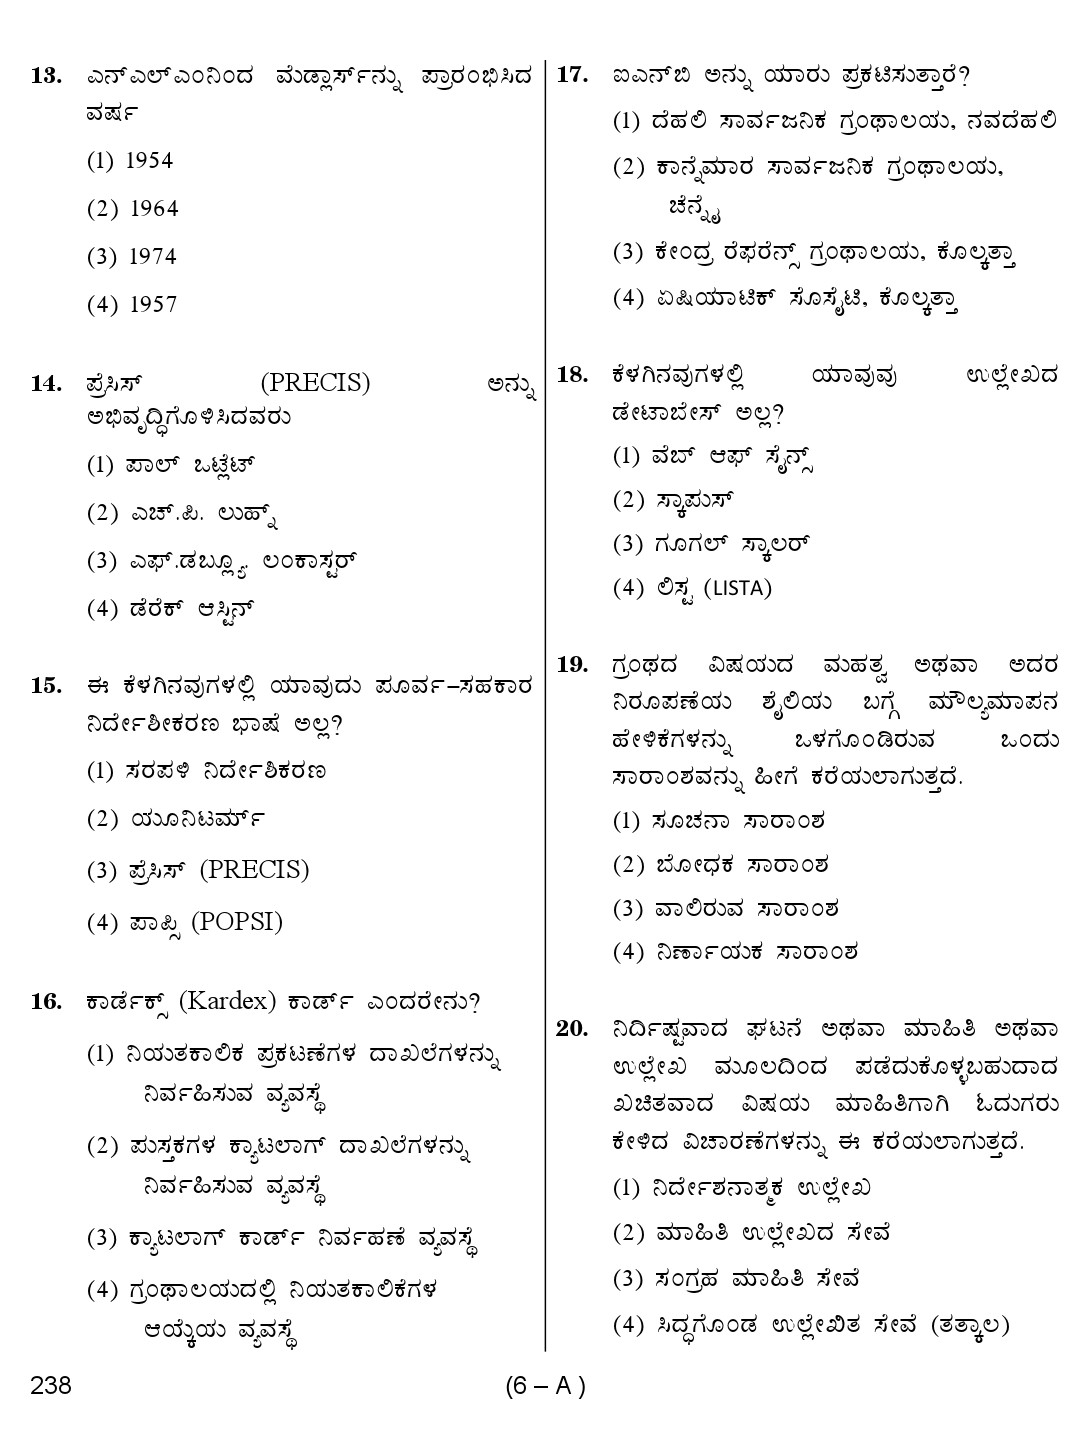 Karnataka PSC 238 Specific Paper II Librarian Exam Sample Question Paper 6